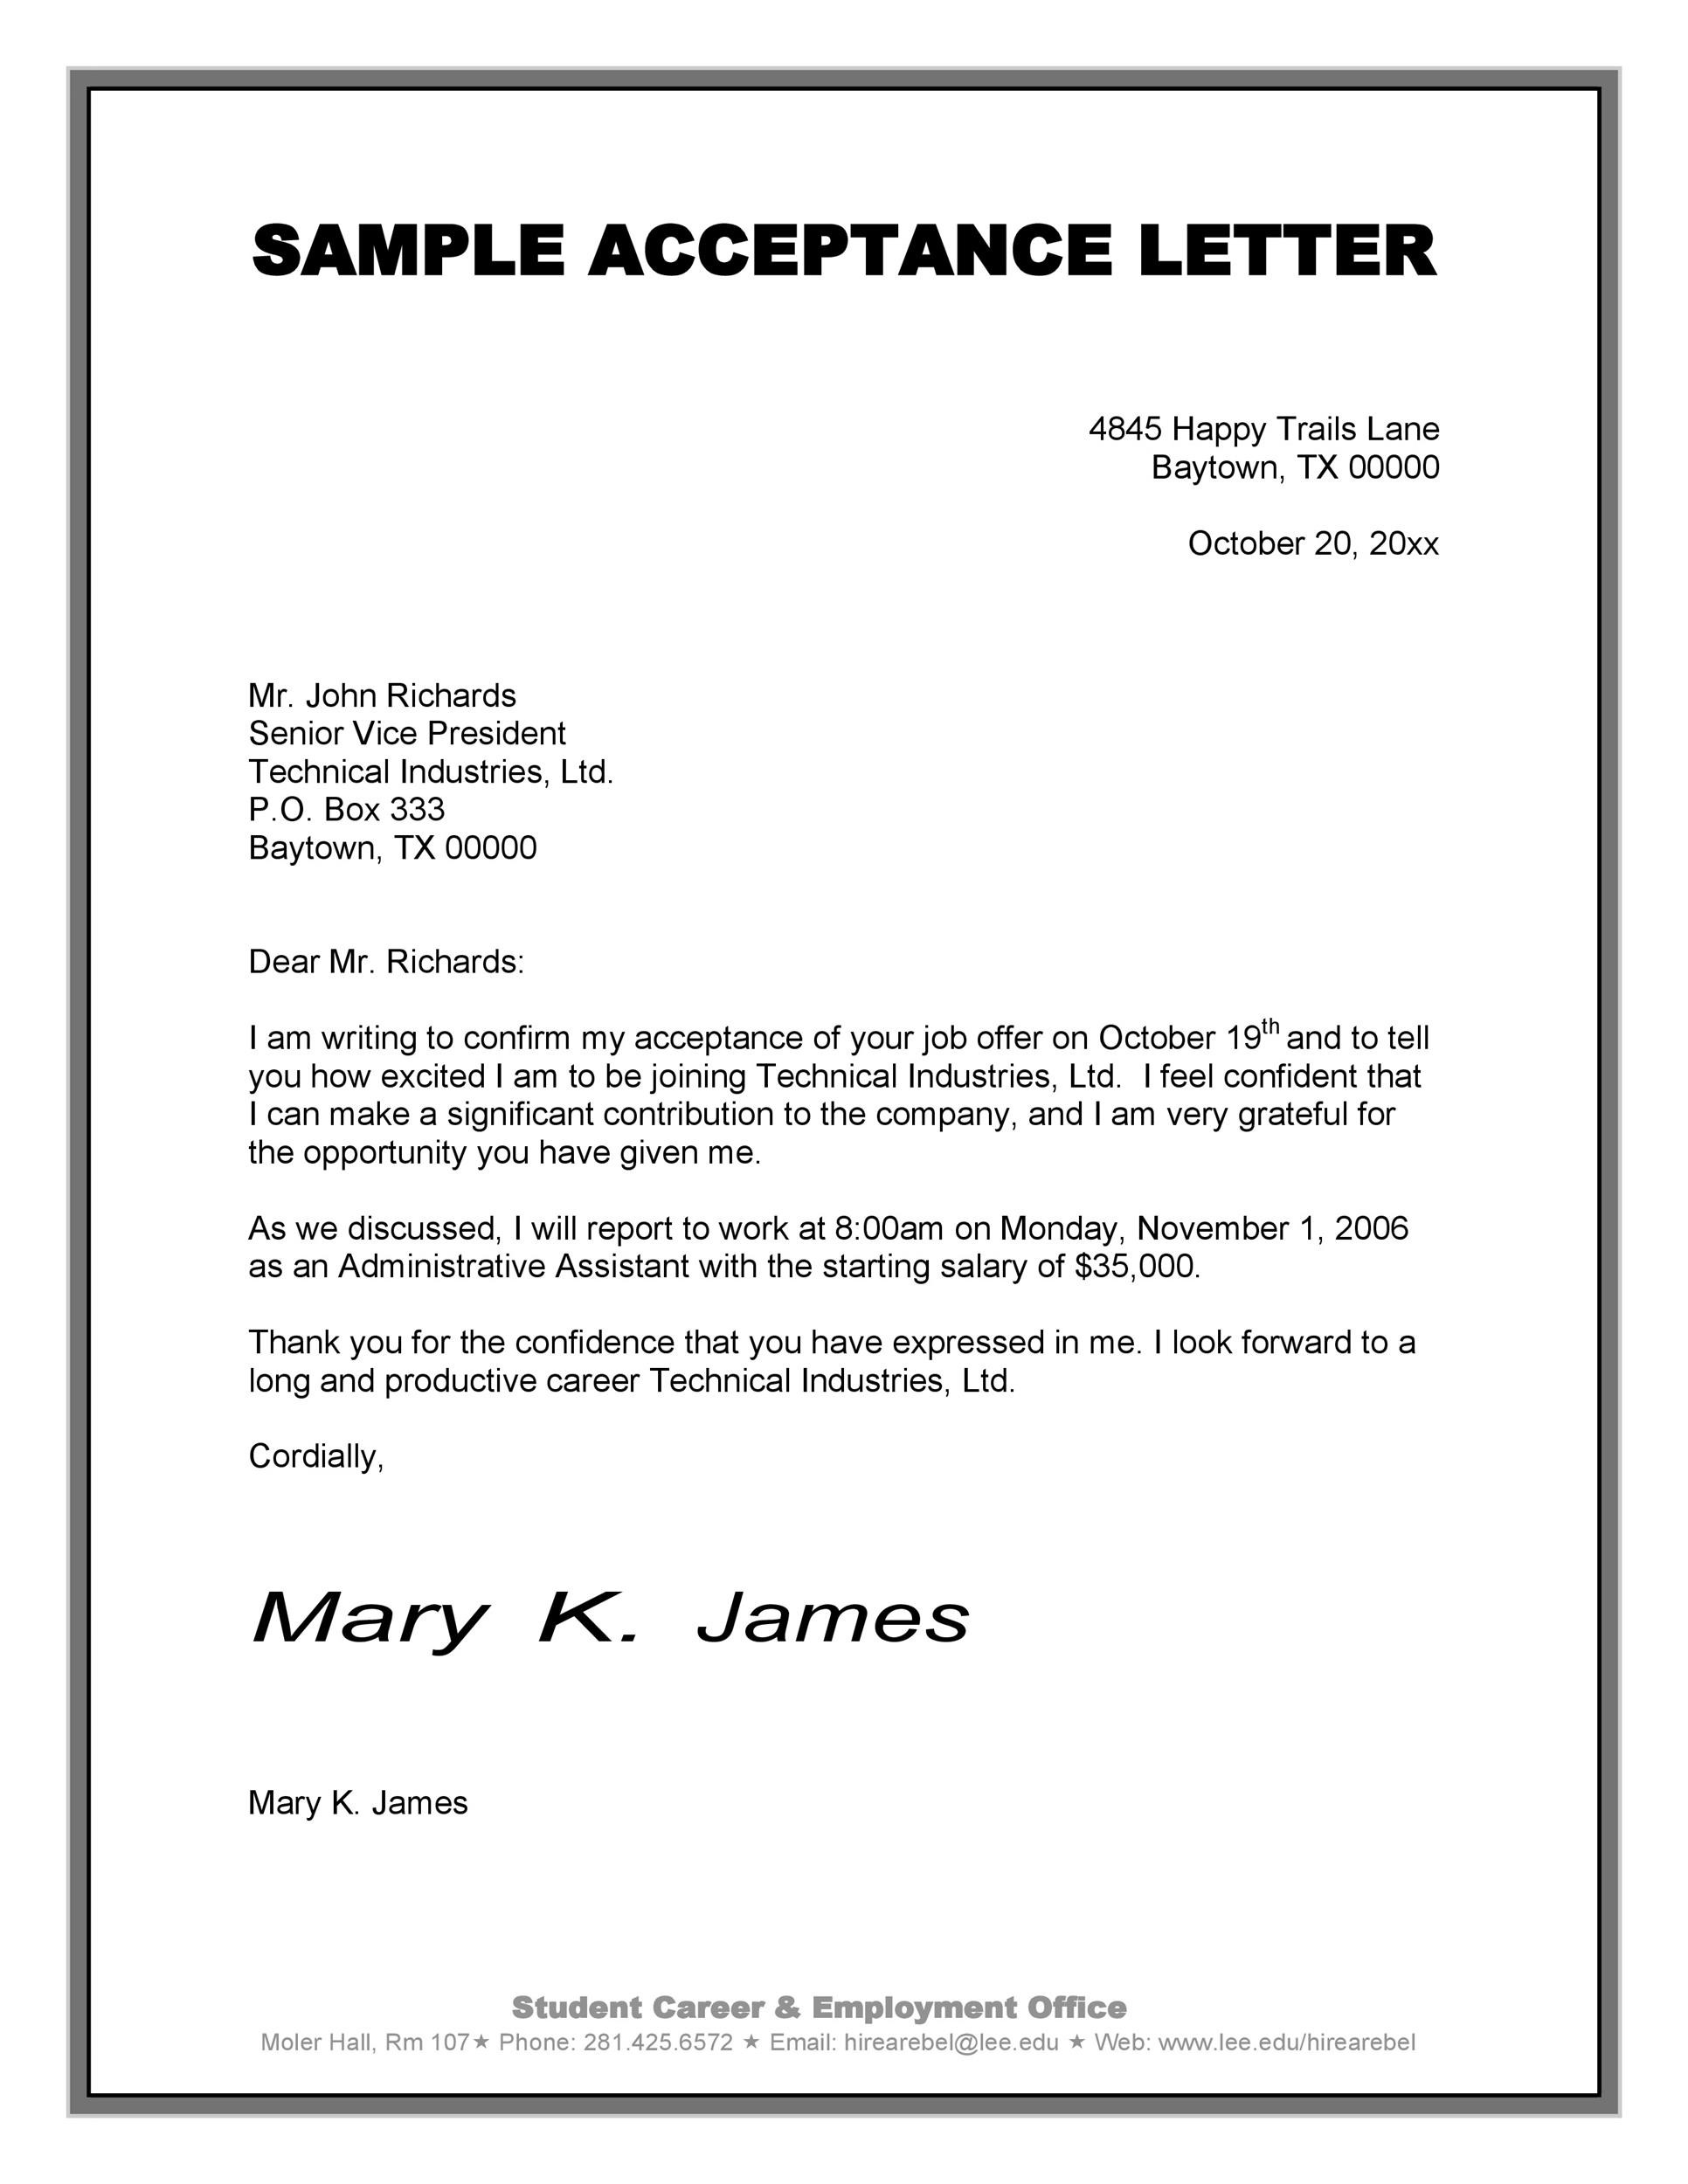 How to write a job acceptance letter (with samples).